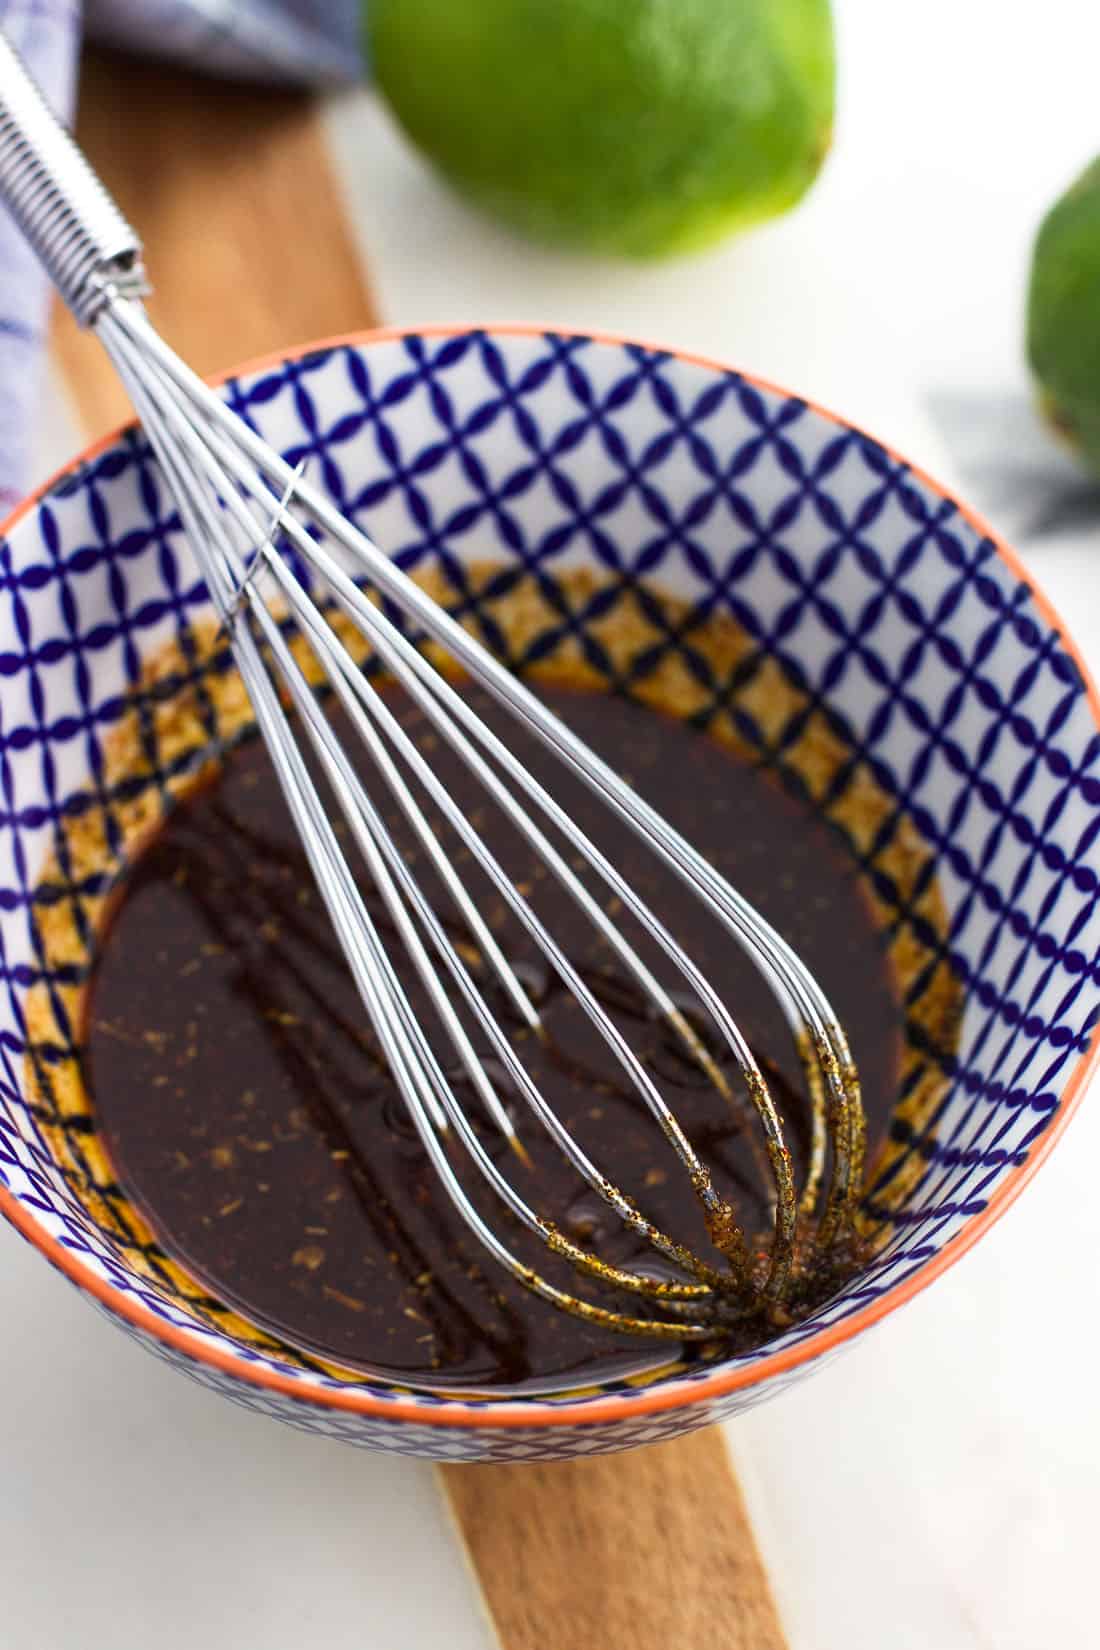 Whisked together chili lime glaze in a small bowl with a whisk